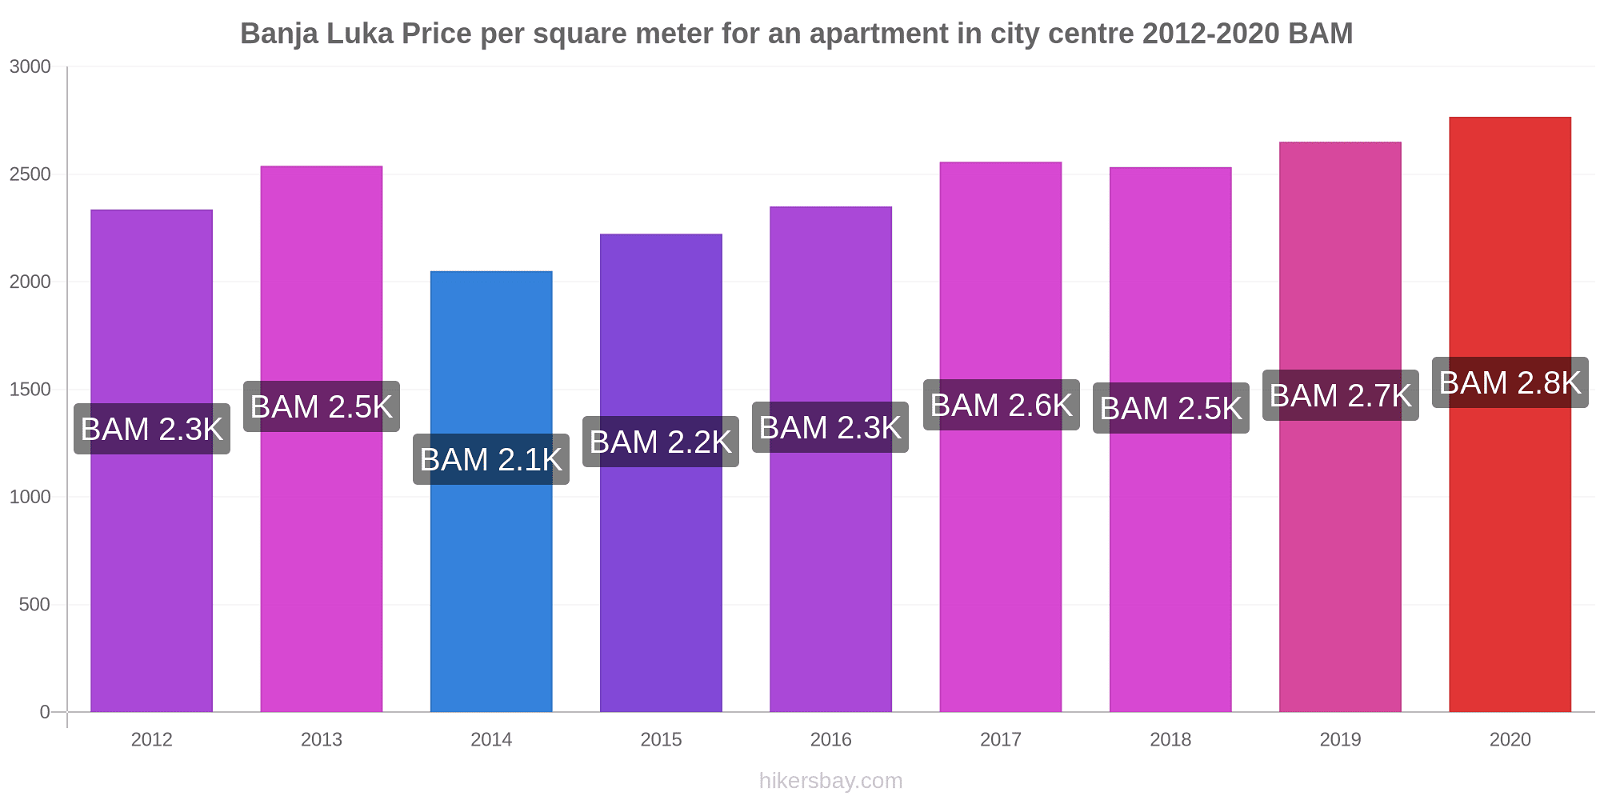 Banja Luka price changes Price per square meter for an apartment in city centre hikersbay.com